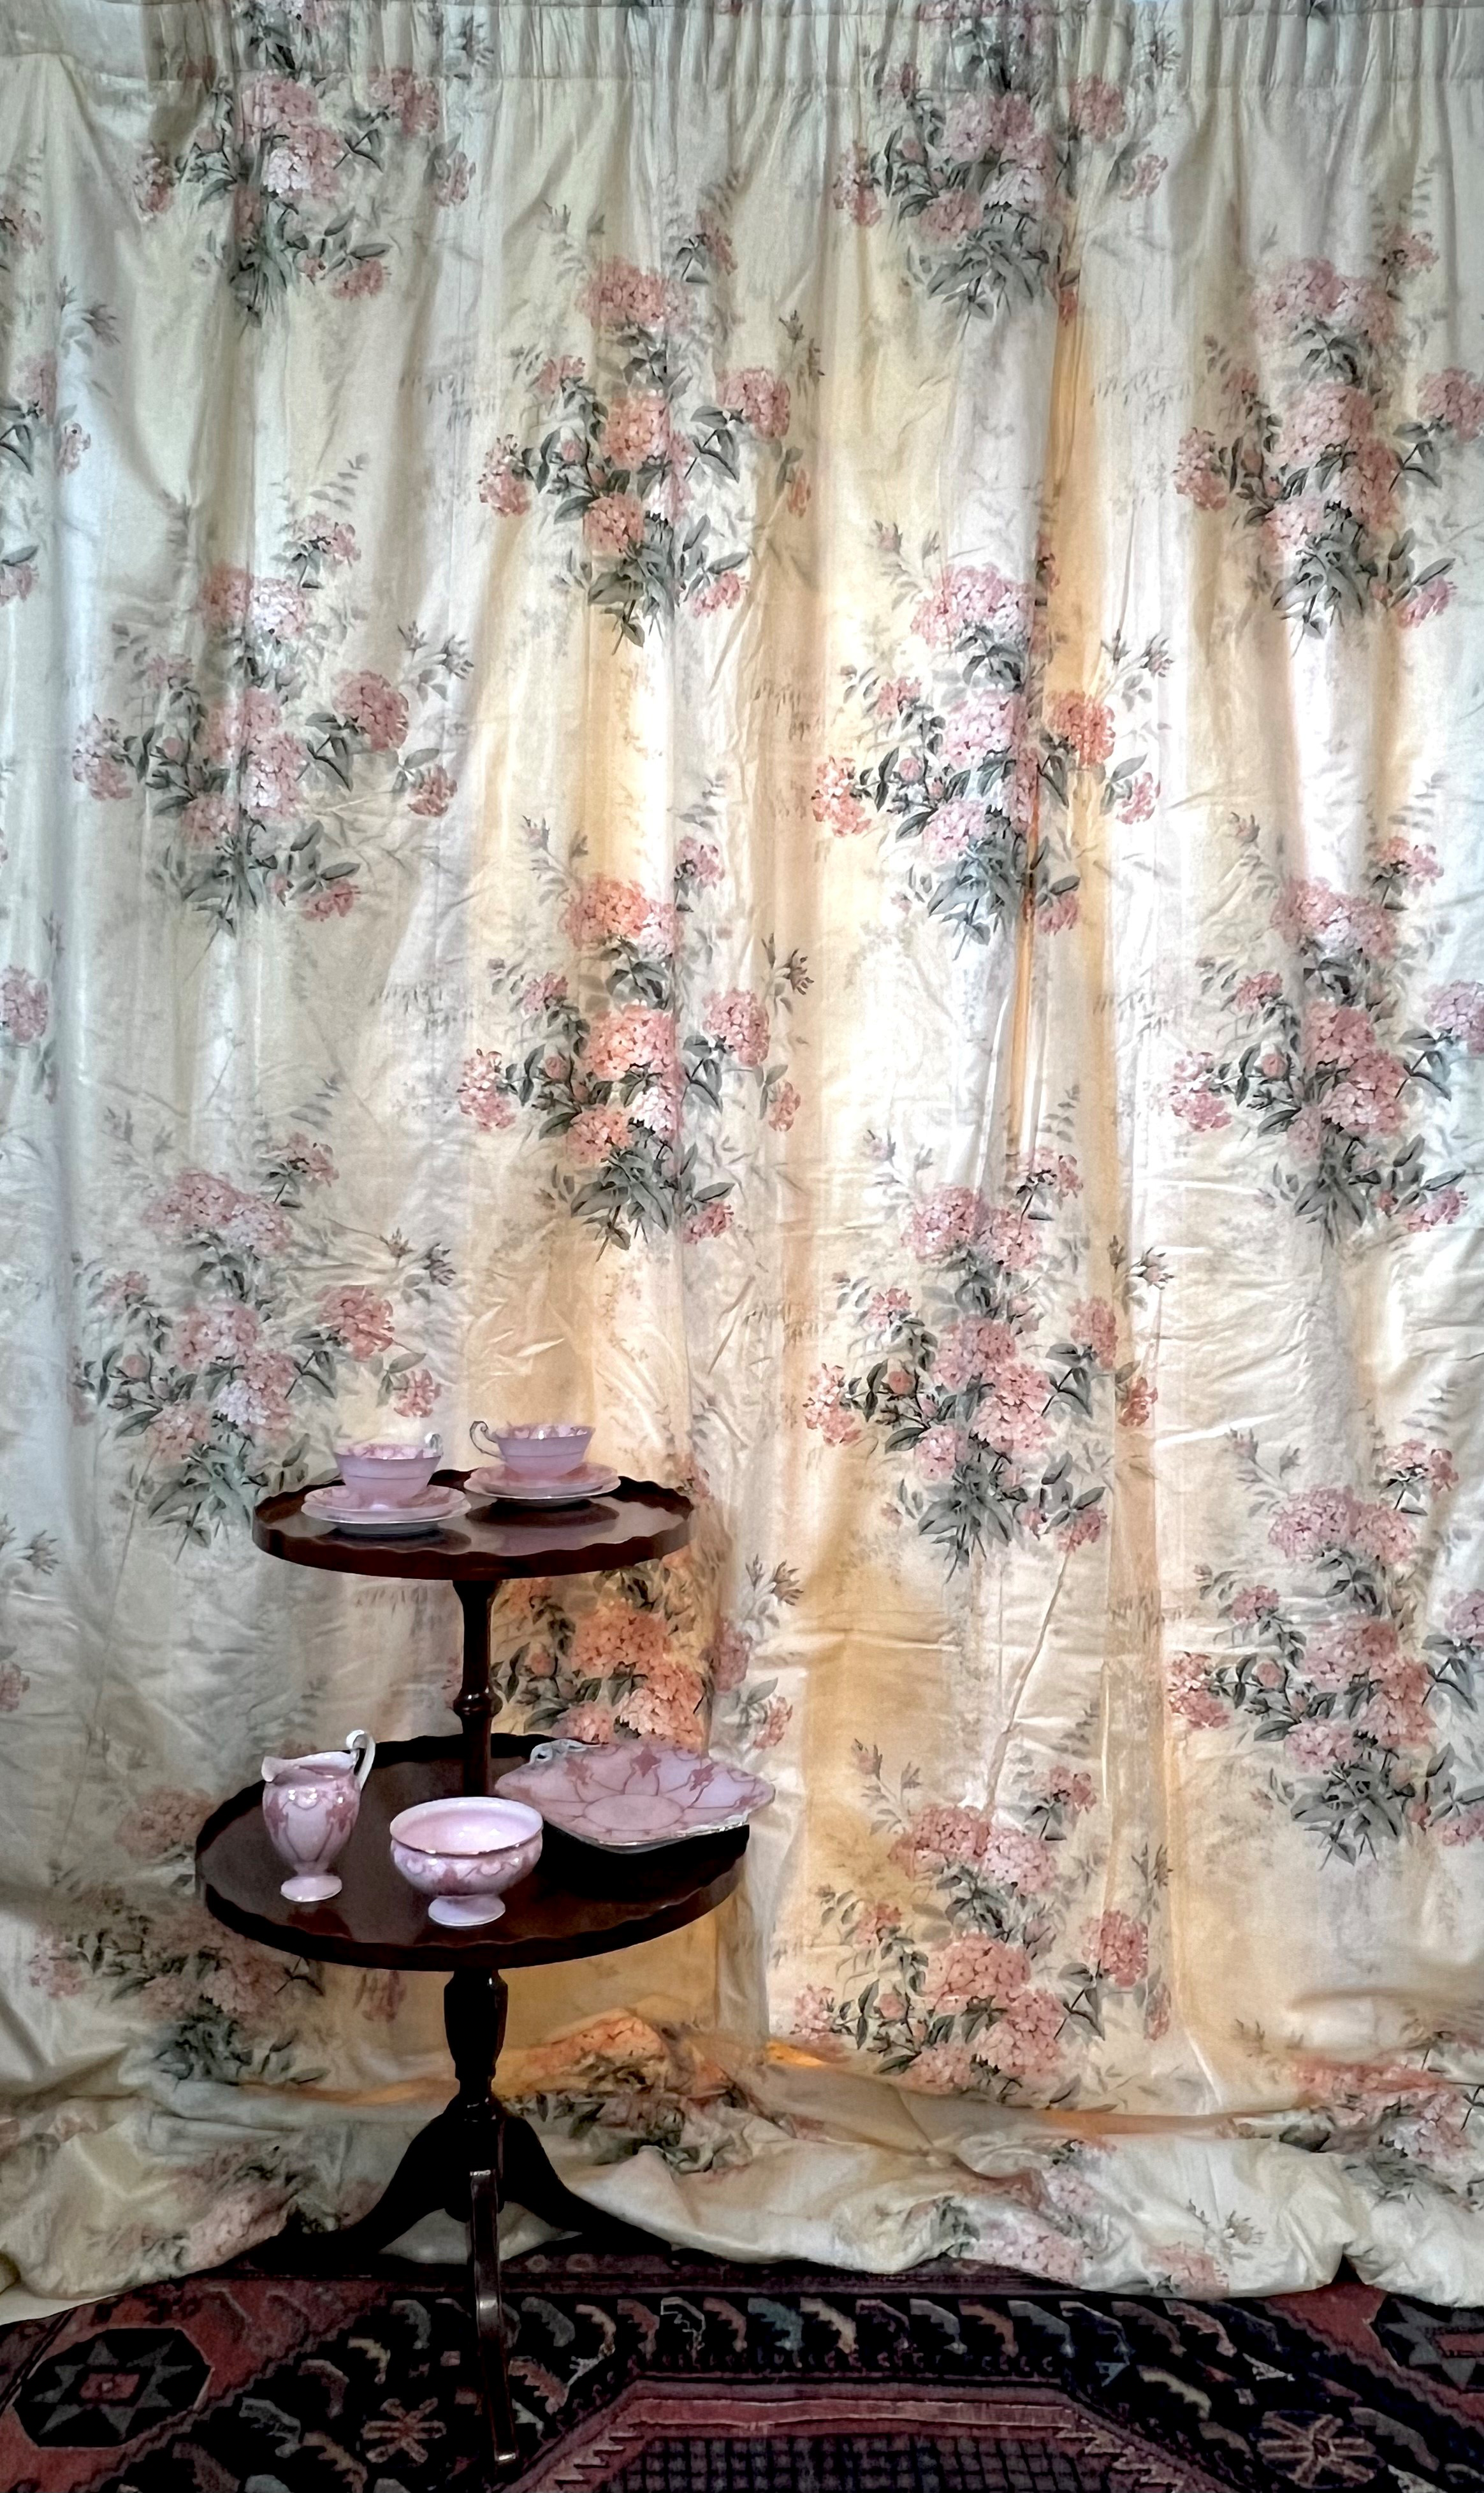 A pair of handmade curtains in ‘Plumbago Bouquet’ cotton chintz by Colefax and Fowler, together with